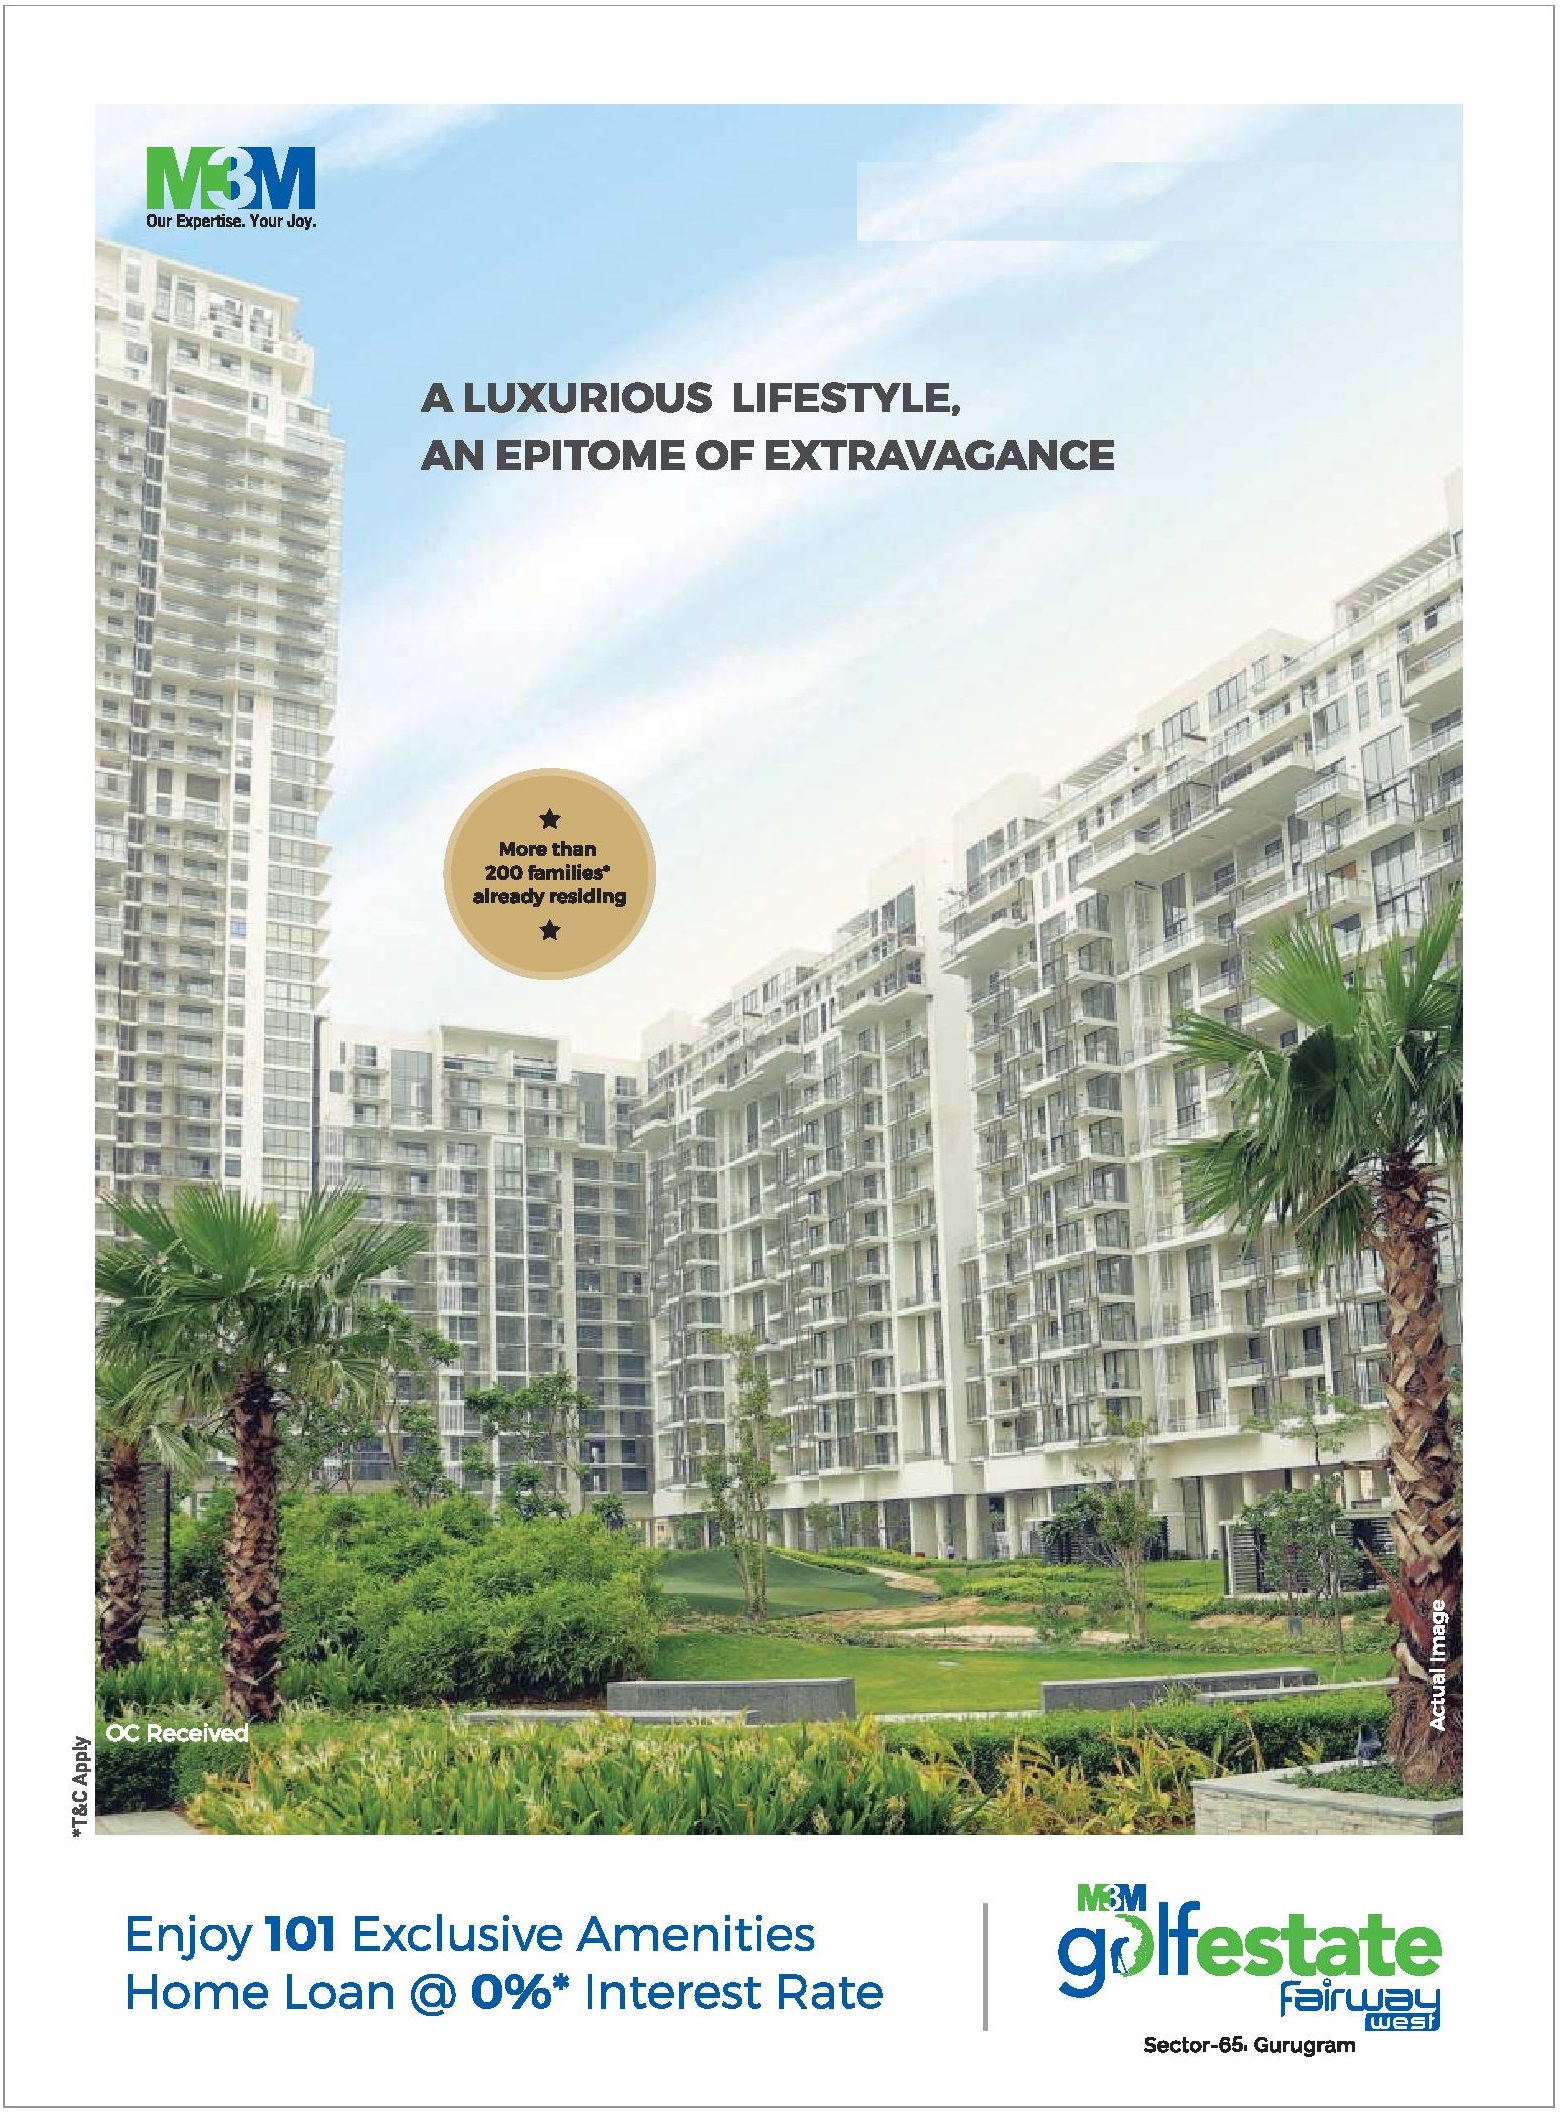 Avail a luxurious lifestyle, an epitome of extravagance at M3M Golf Estate in Gugaon Update